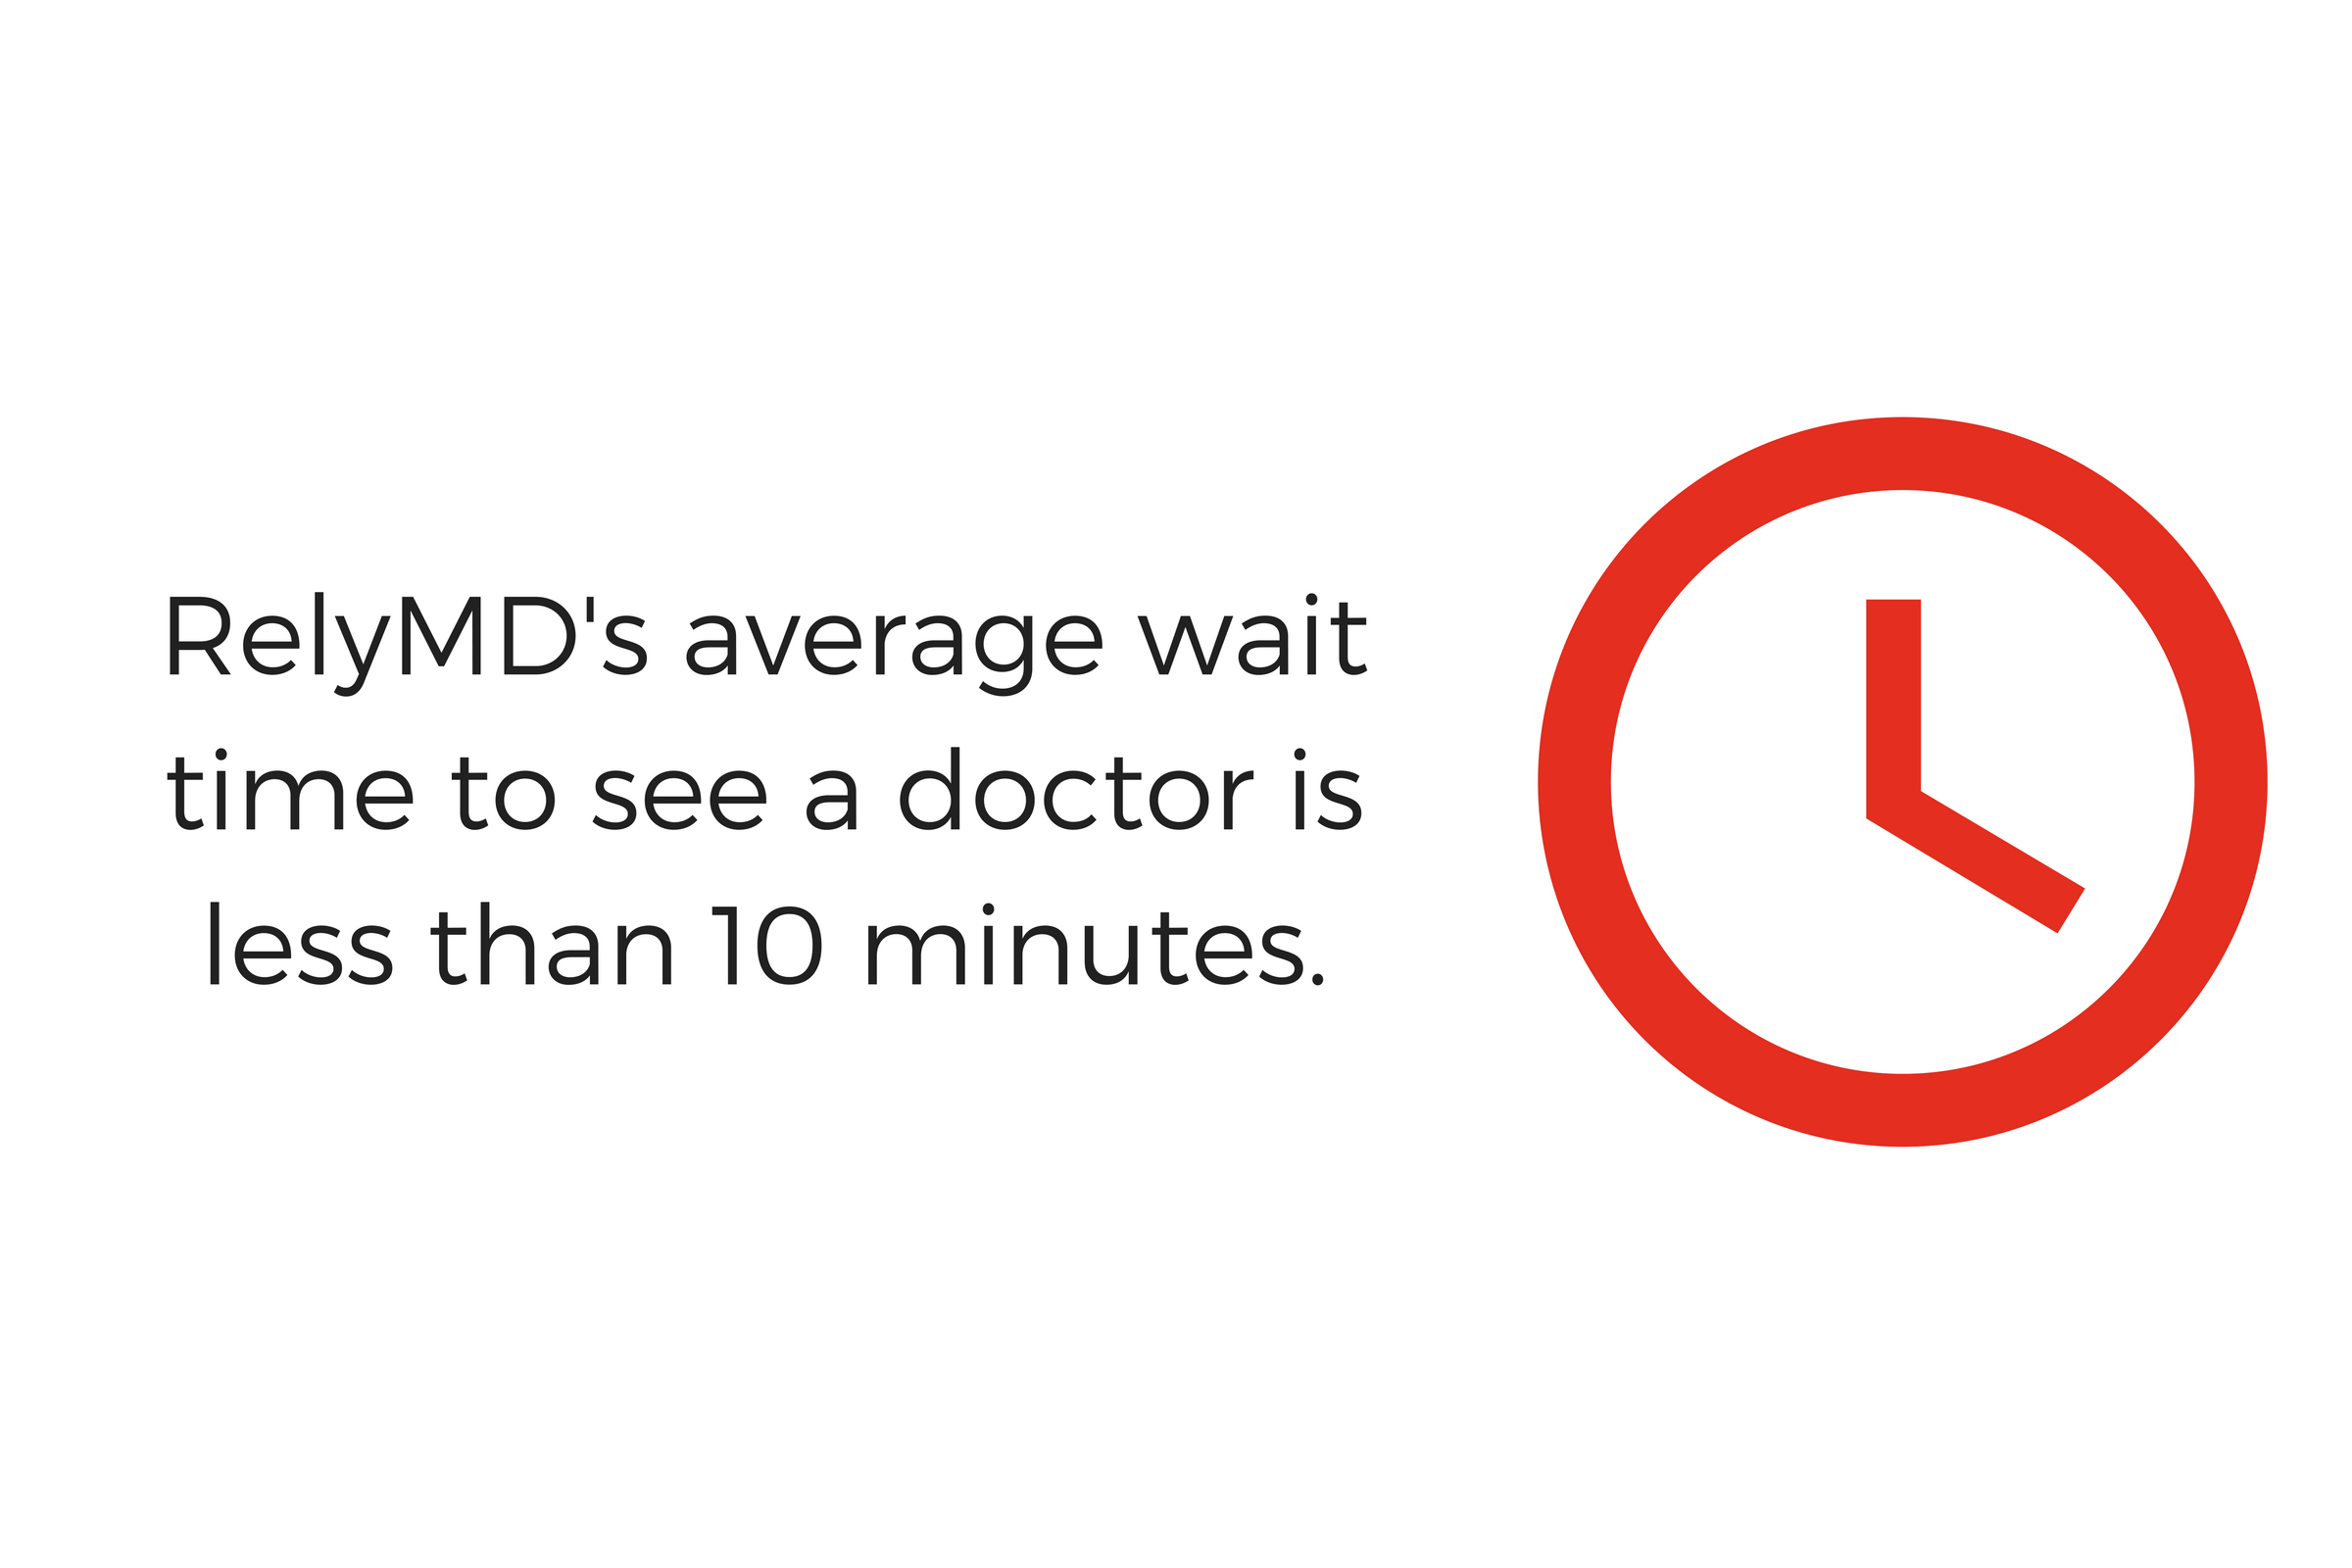 New patients see a doctor in less than 10 minutes